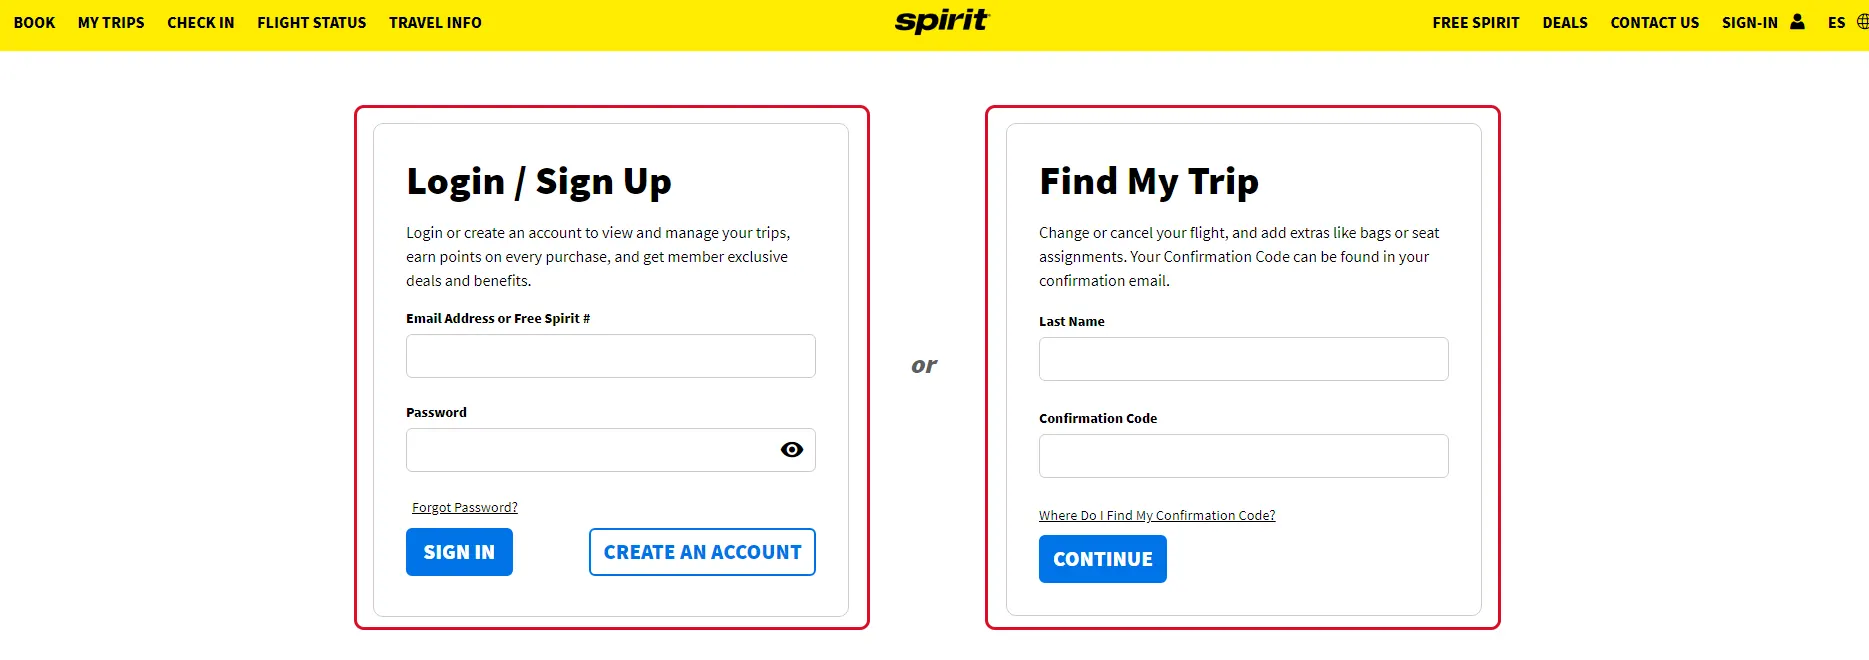 How to Reschedule Your Spirit Flight Online with Ease? 